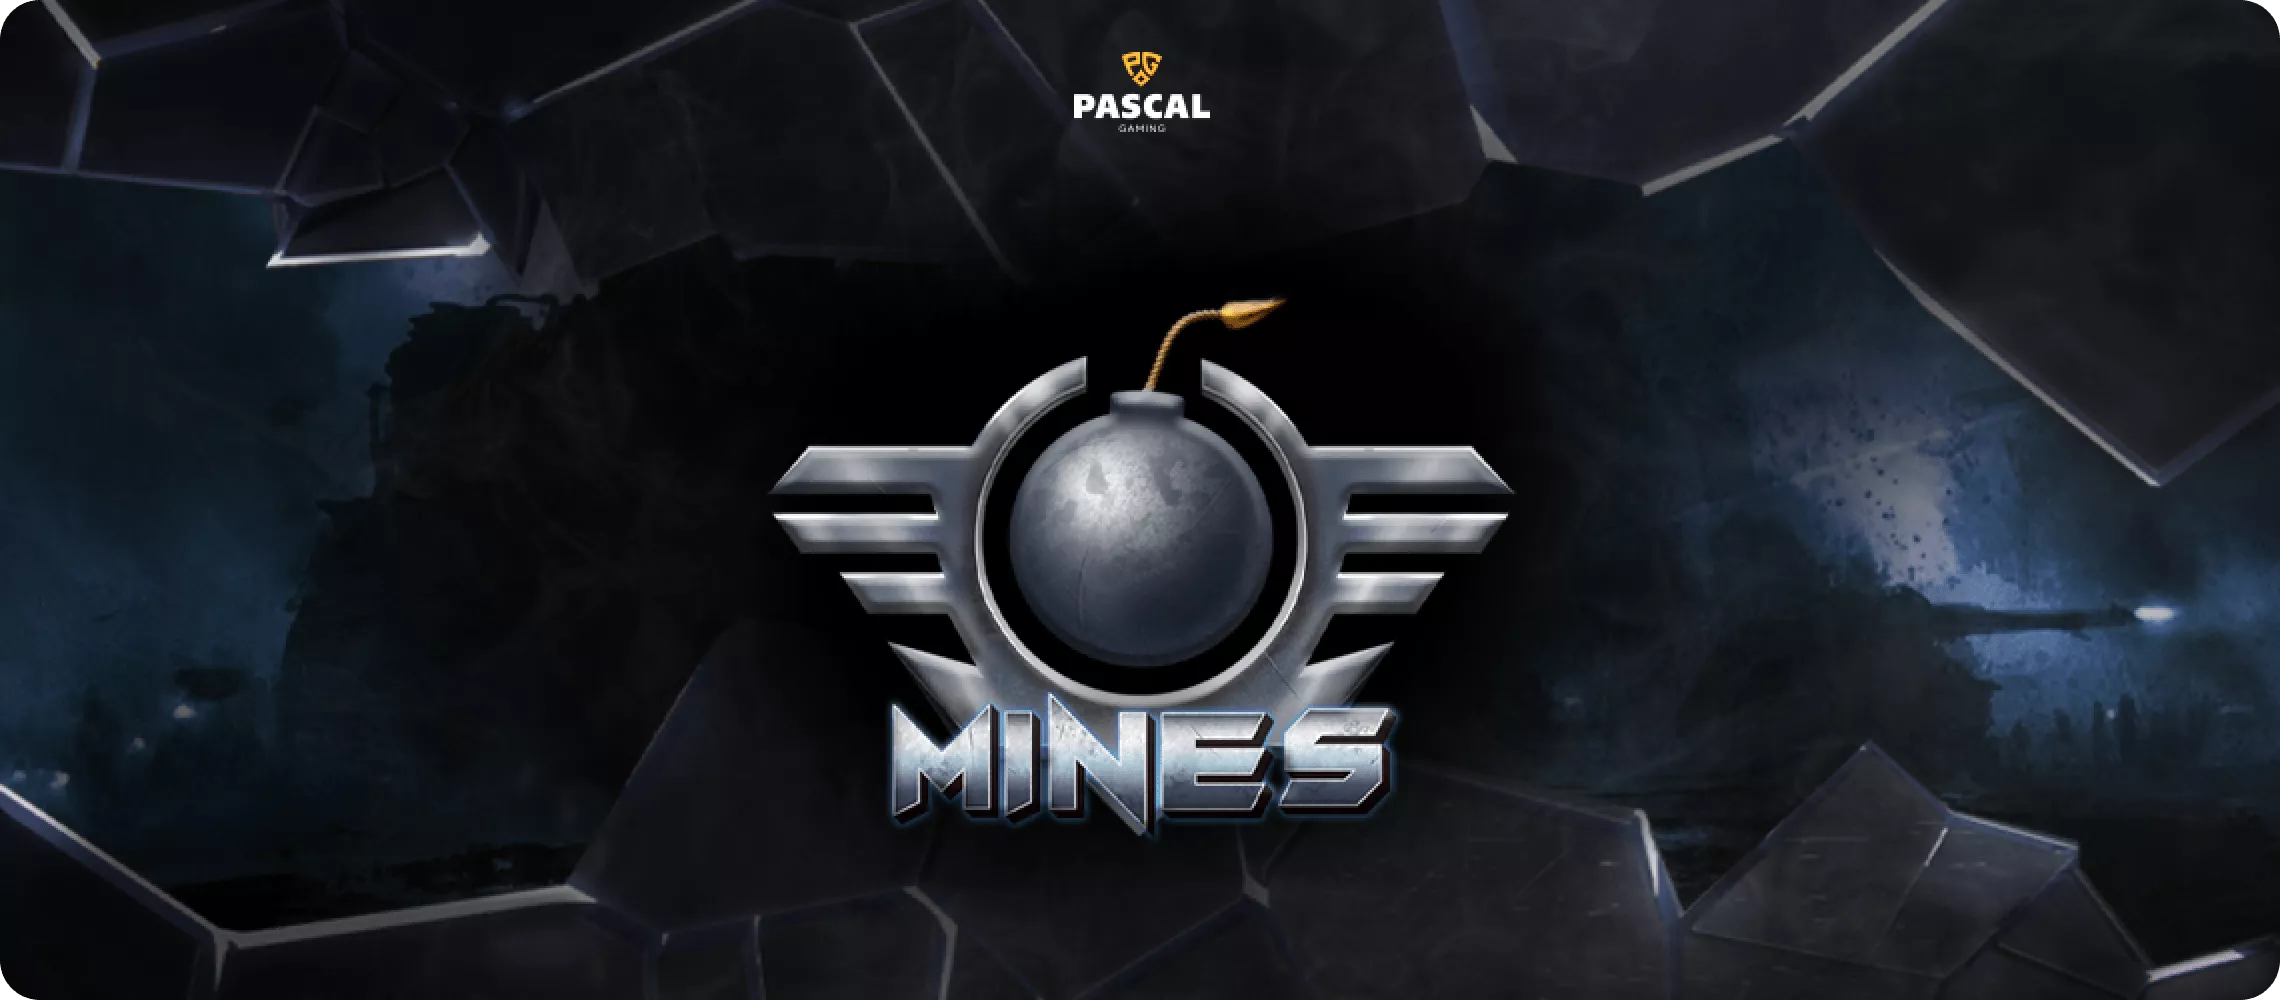 Pascal Gaming Announces The Launch of MINES